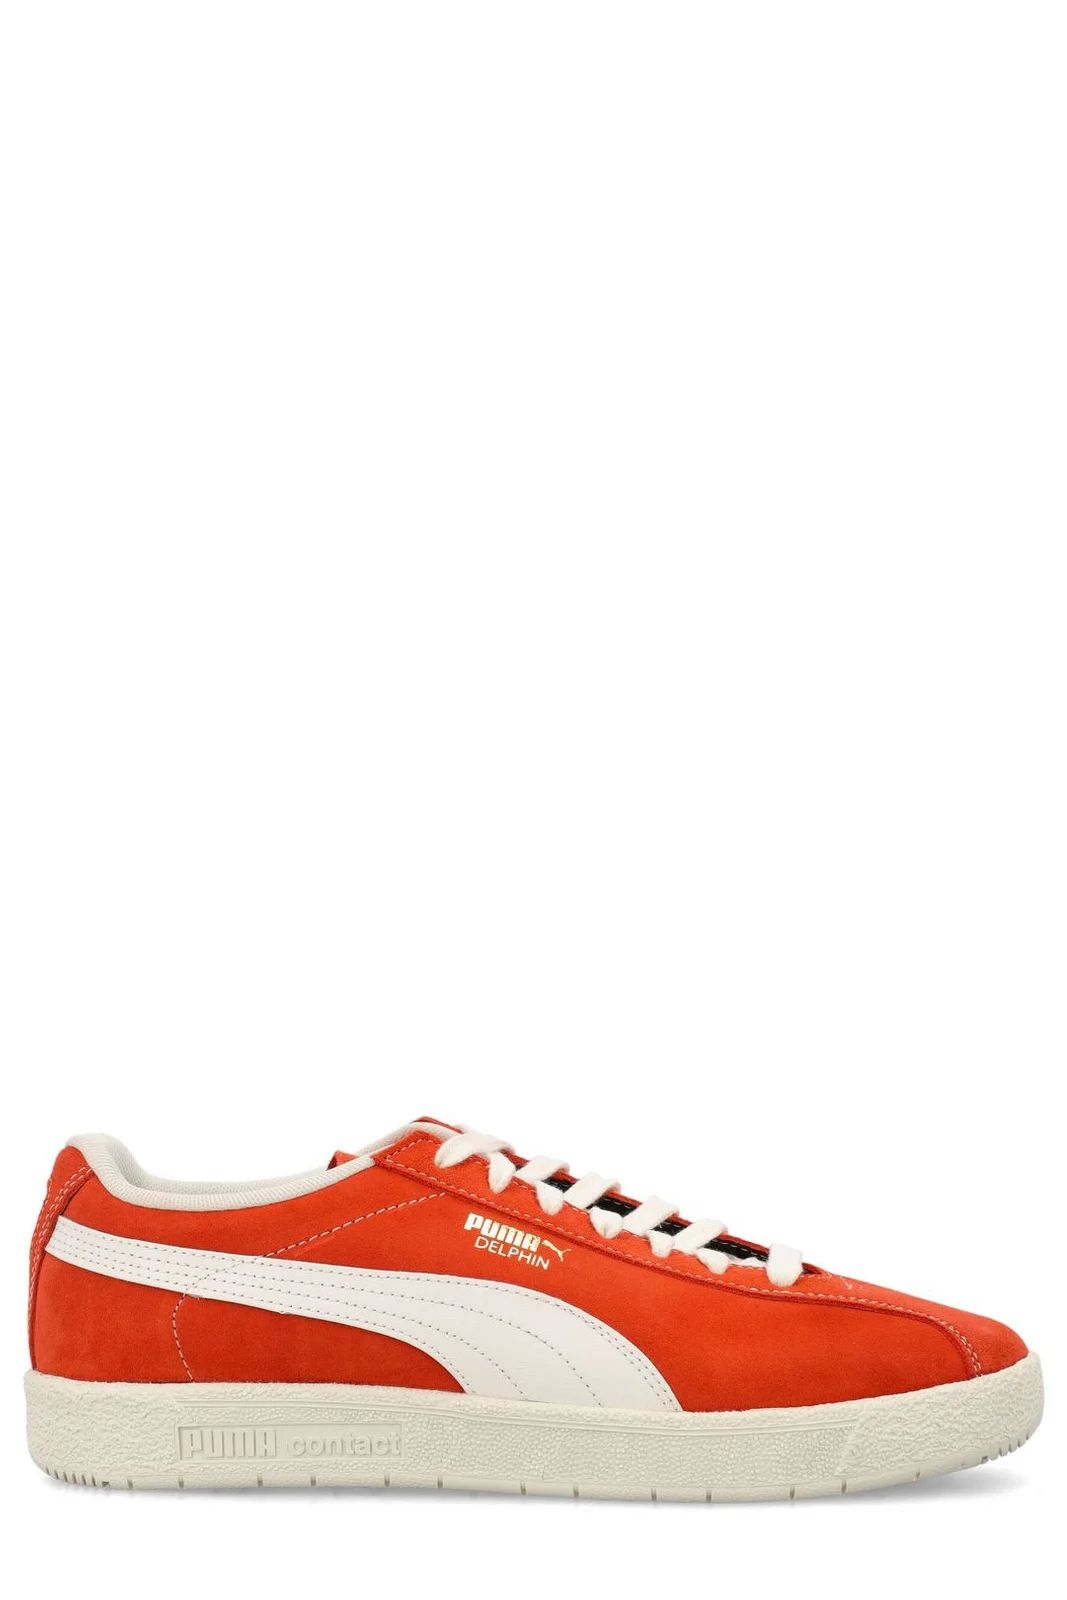 Puma Round Toe Lace-Up Sneakers | Cettire Global